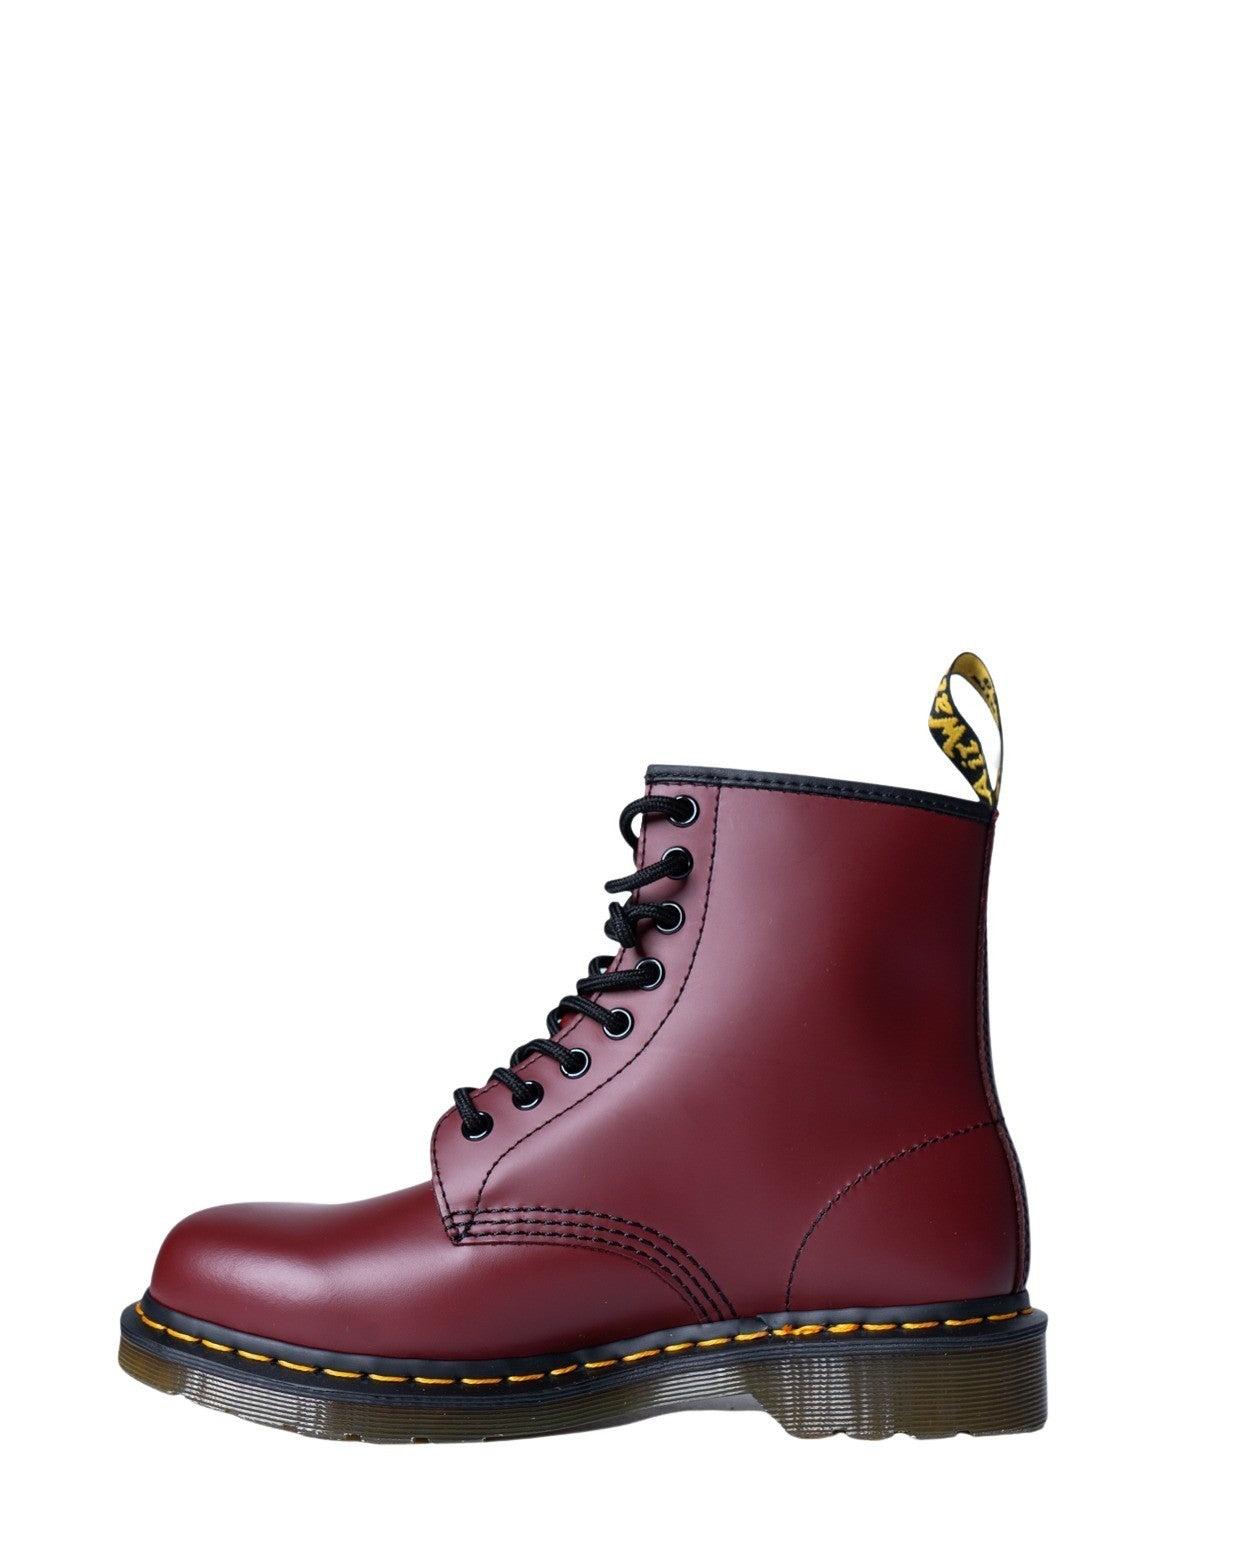 Dr. Martens Rubber Boots in Bordeaux (Red) | Lyst